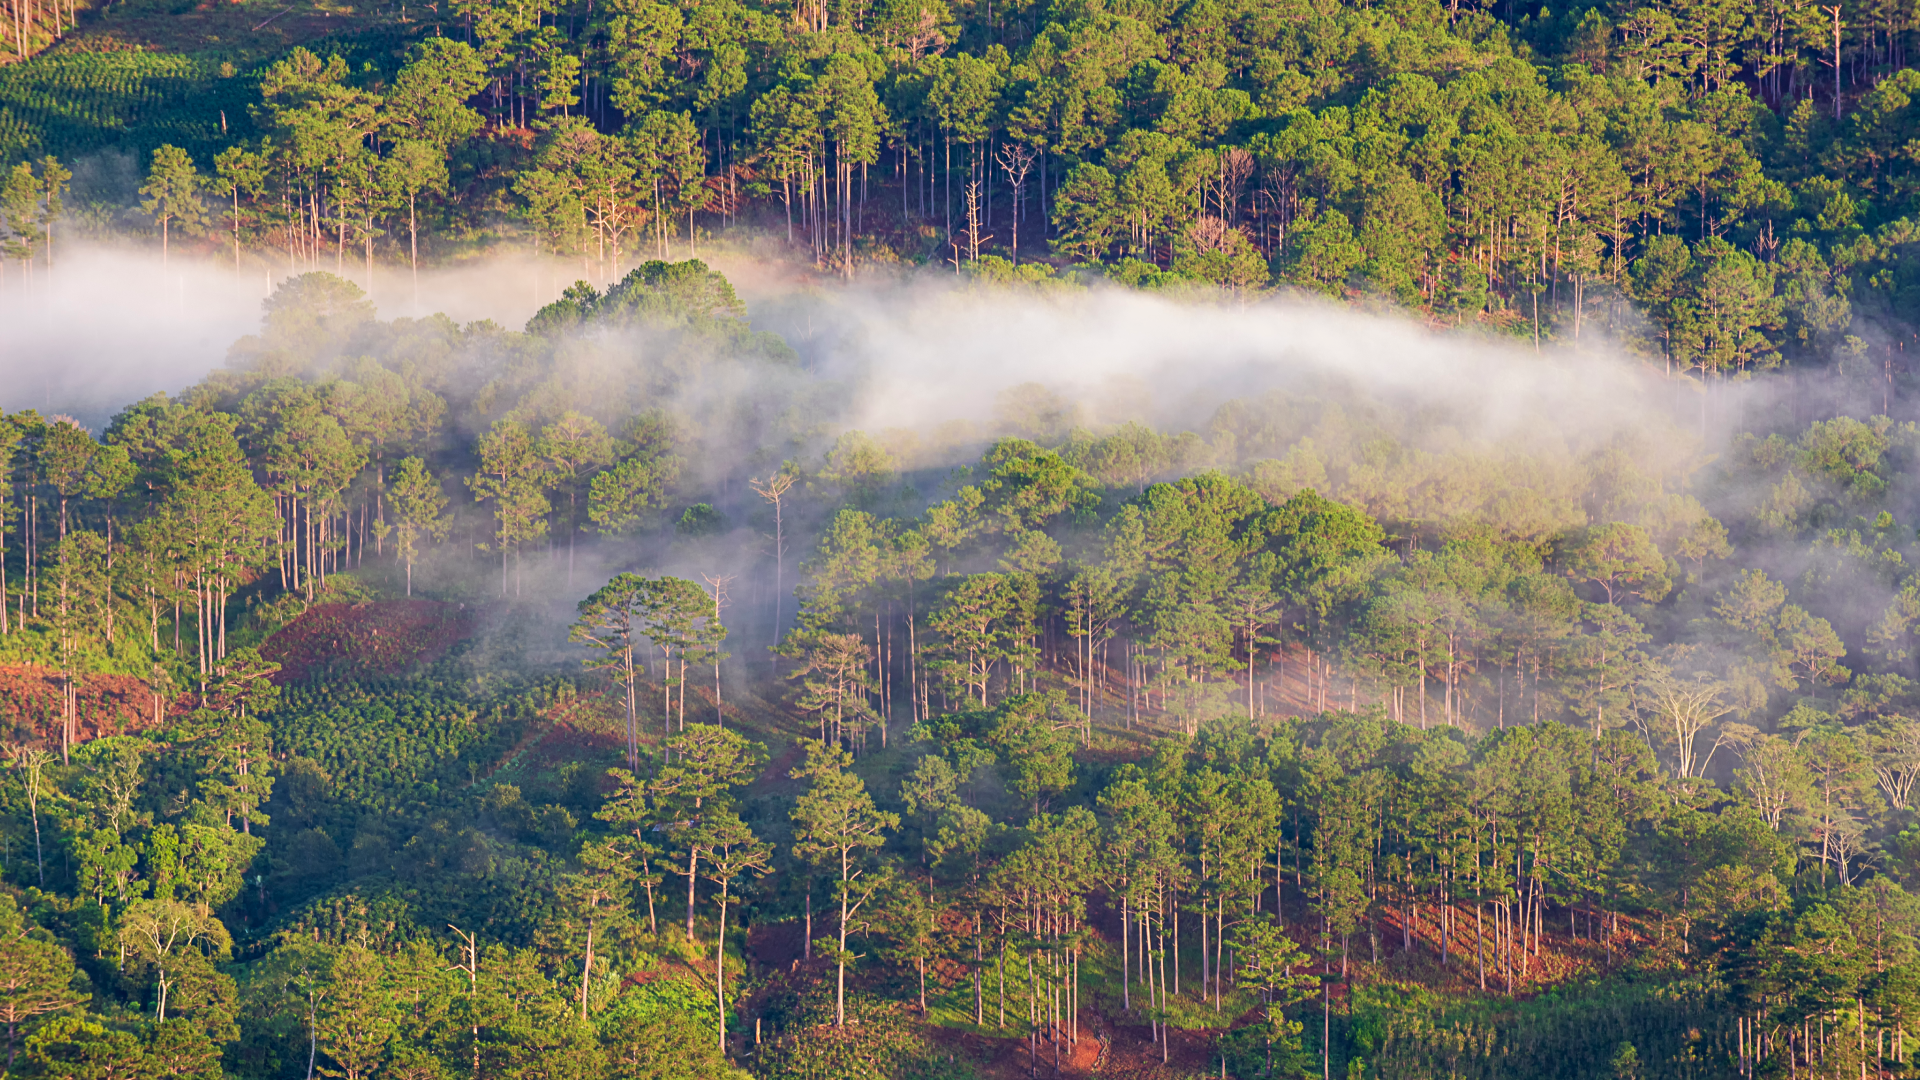 Forest with clouds passing - Getty Images Khanh Bui